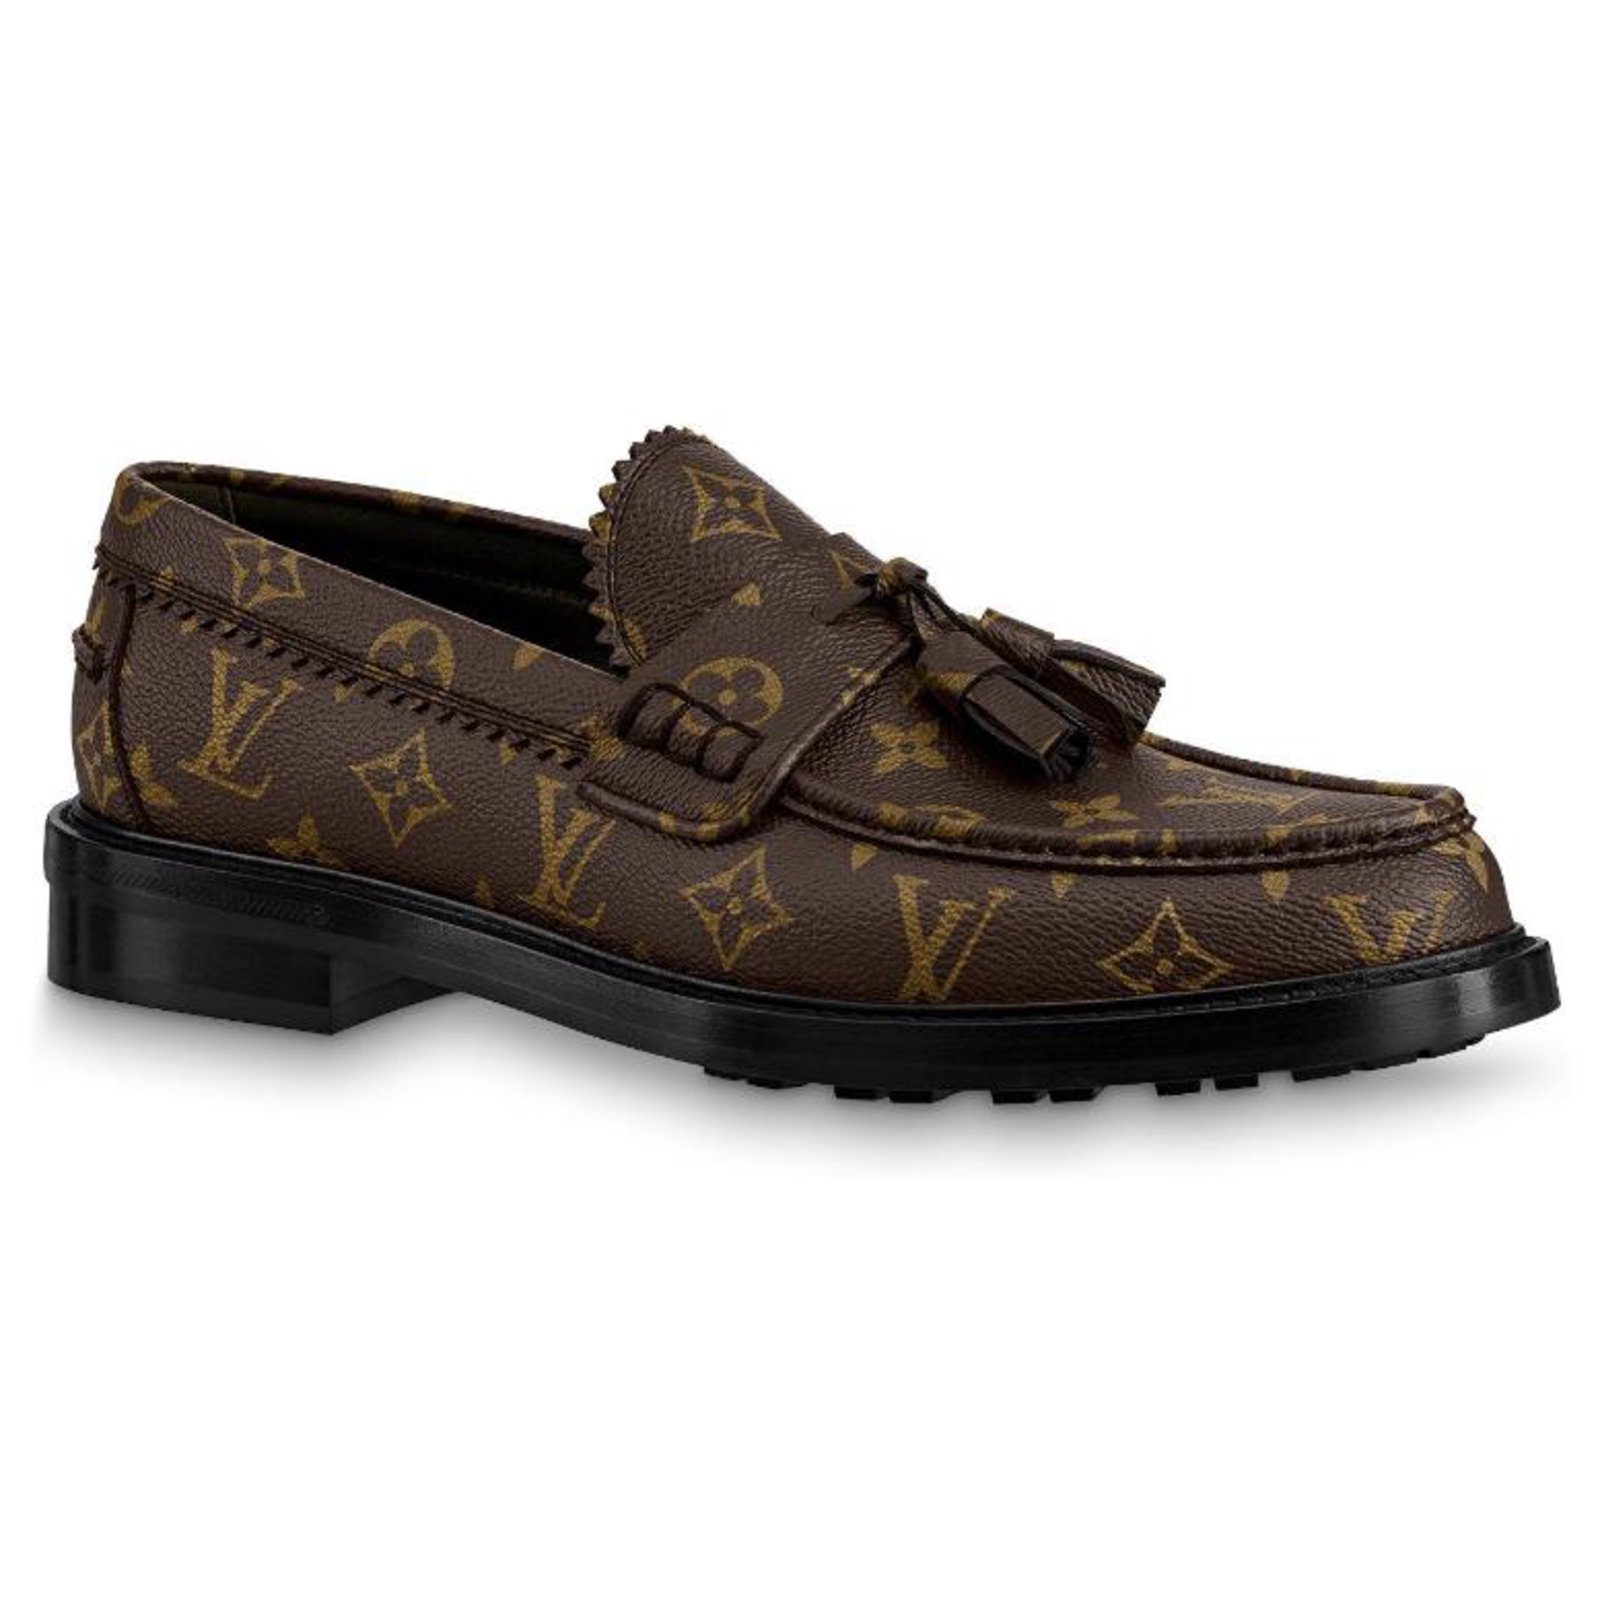 Louis Vuitton lv man shoes leather loafers